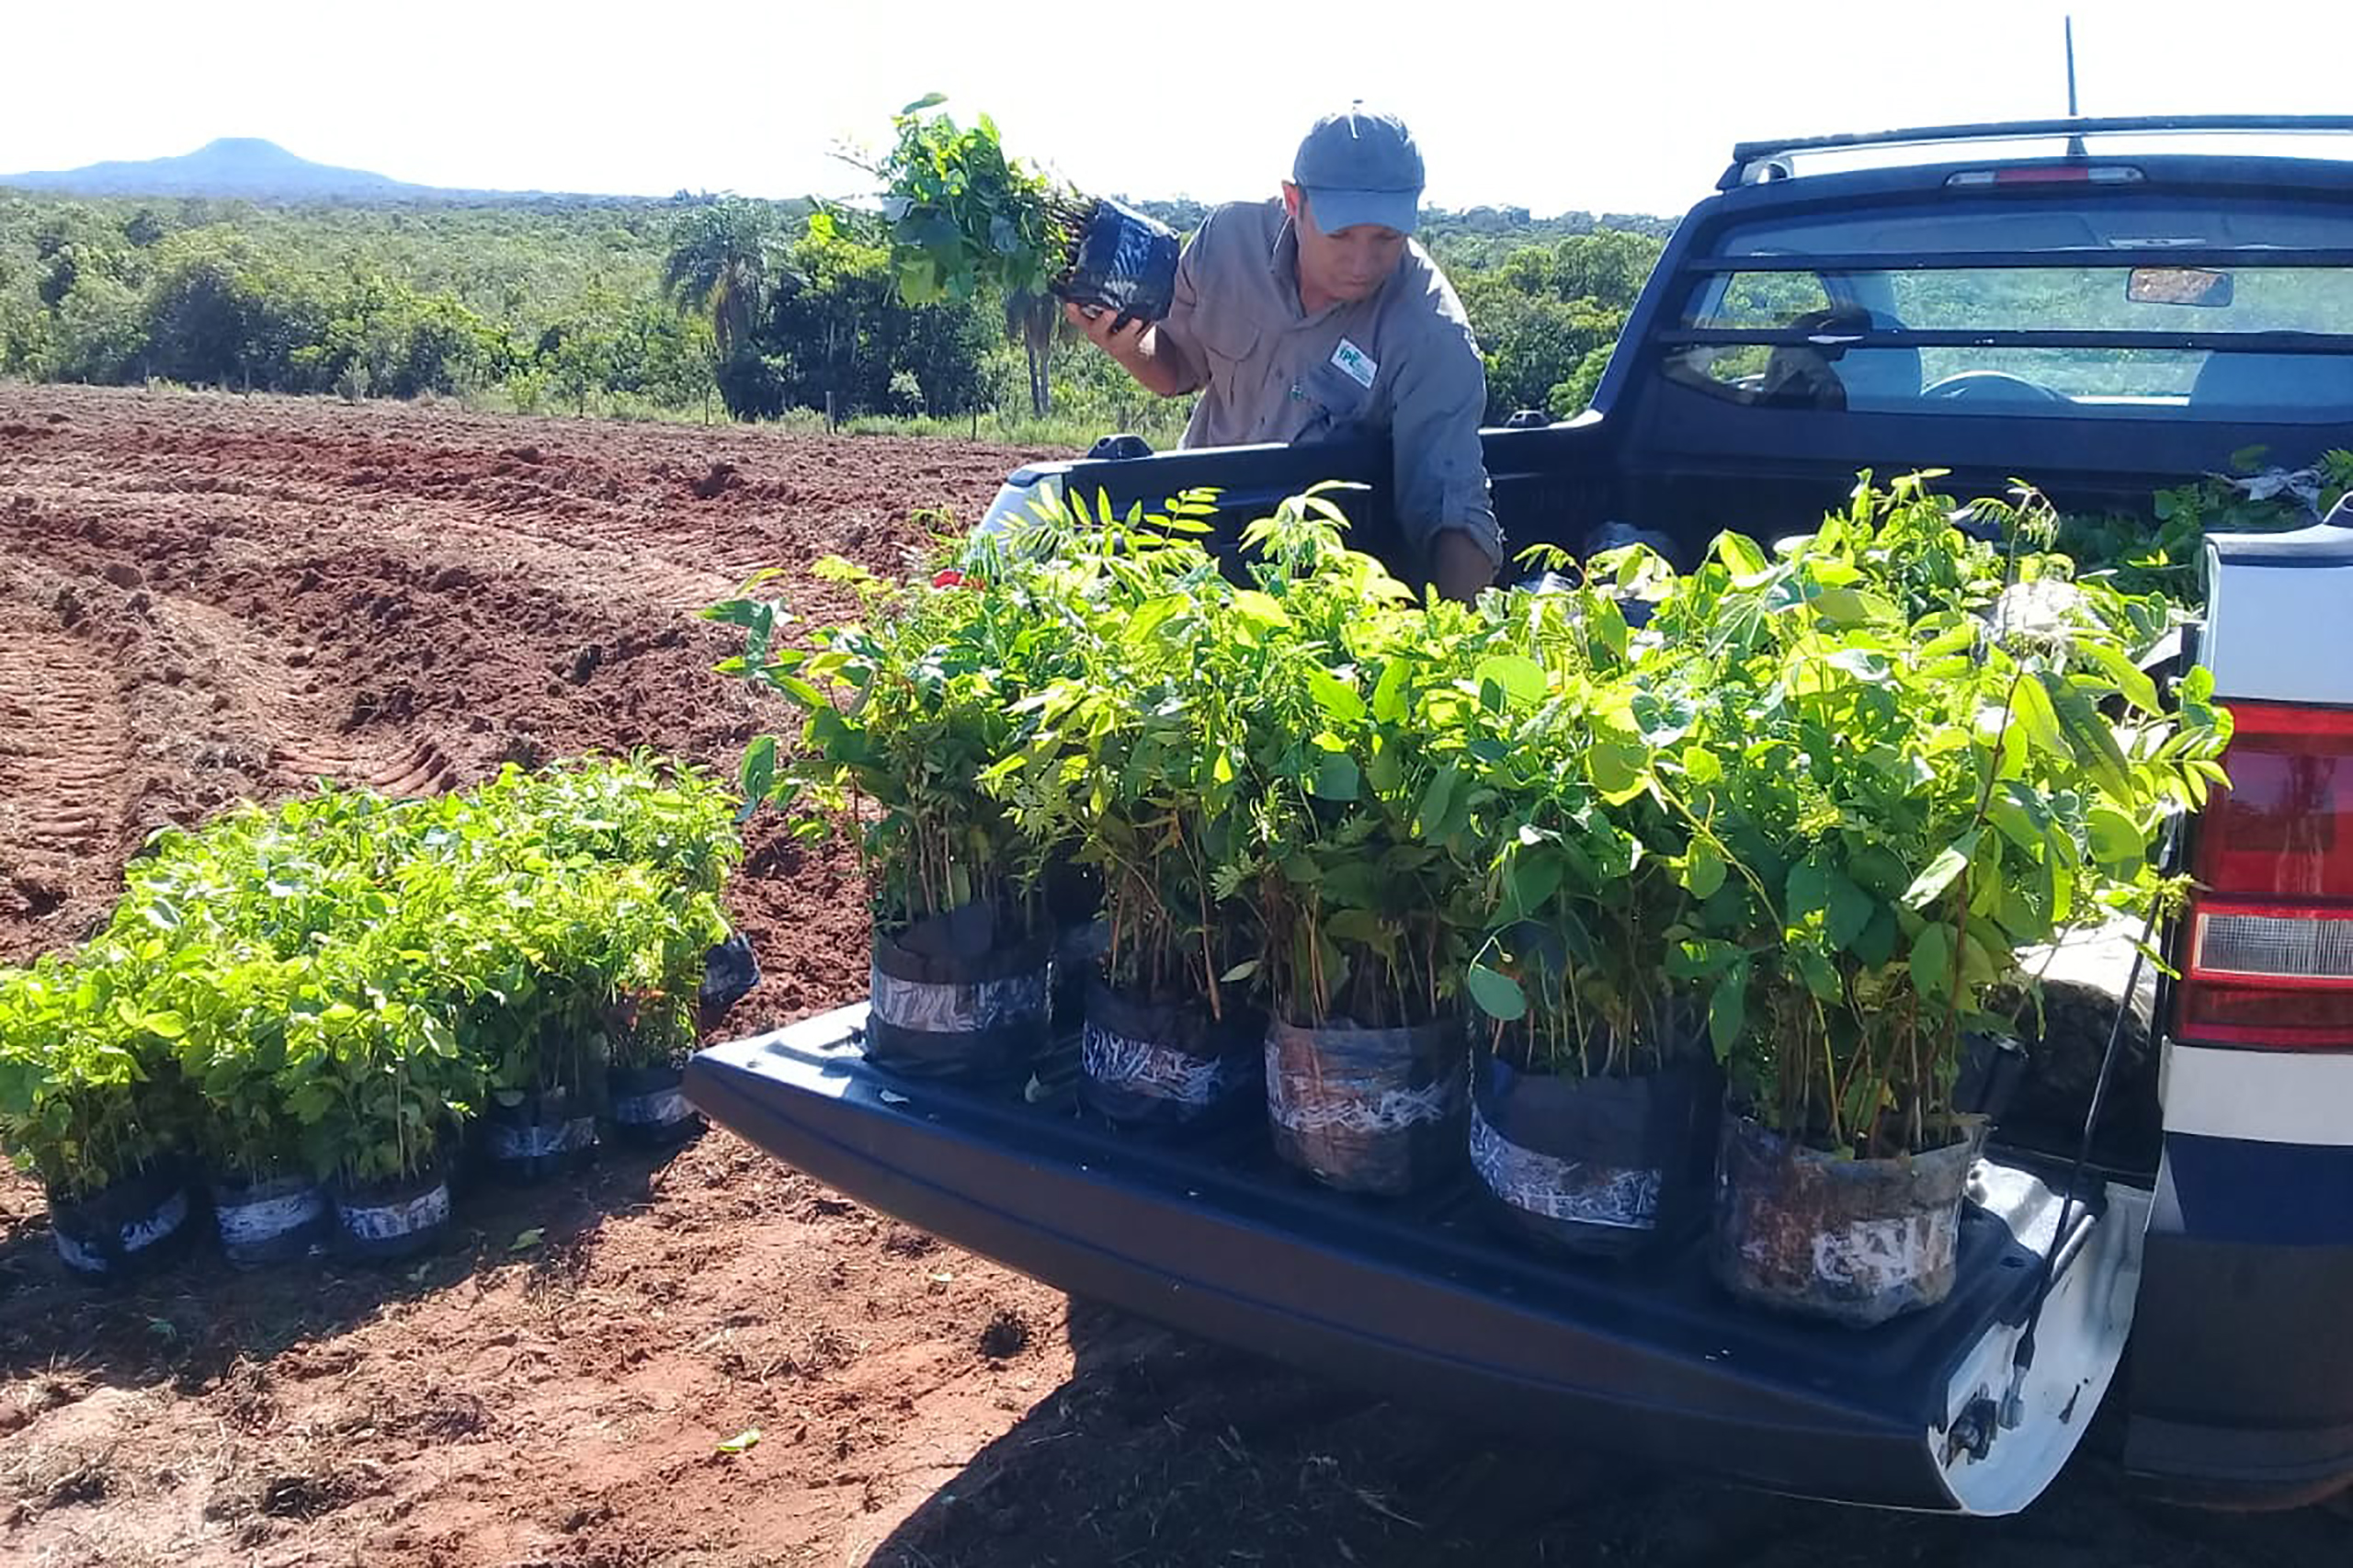 Transplanting the produced seedlings to the planting sites provides an opportunity for income. © IPÊ